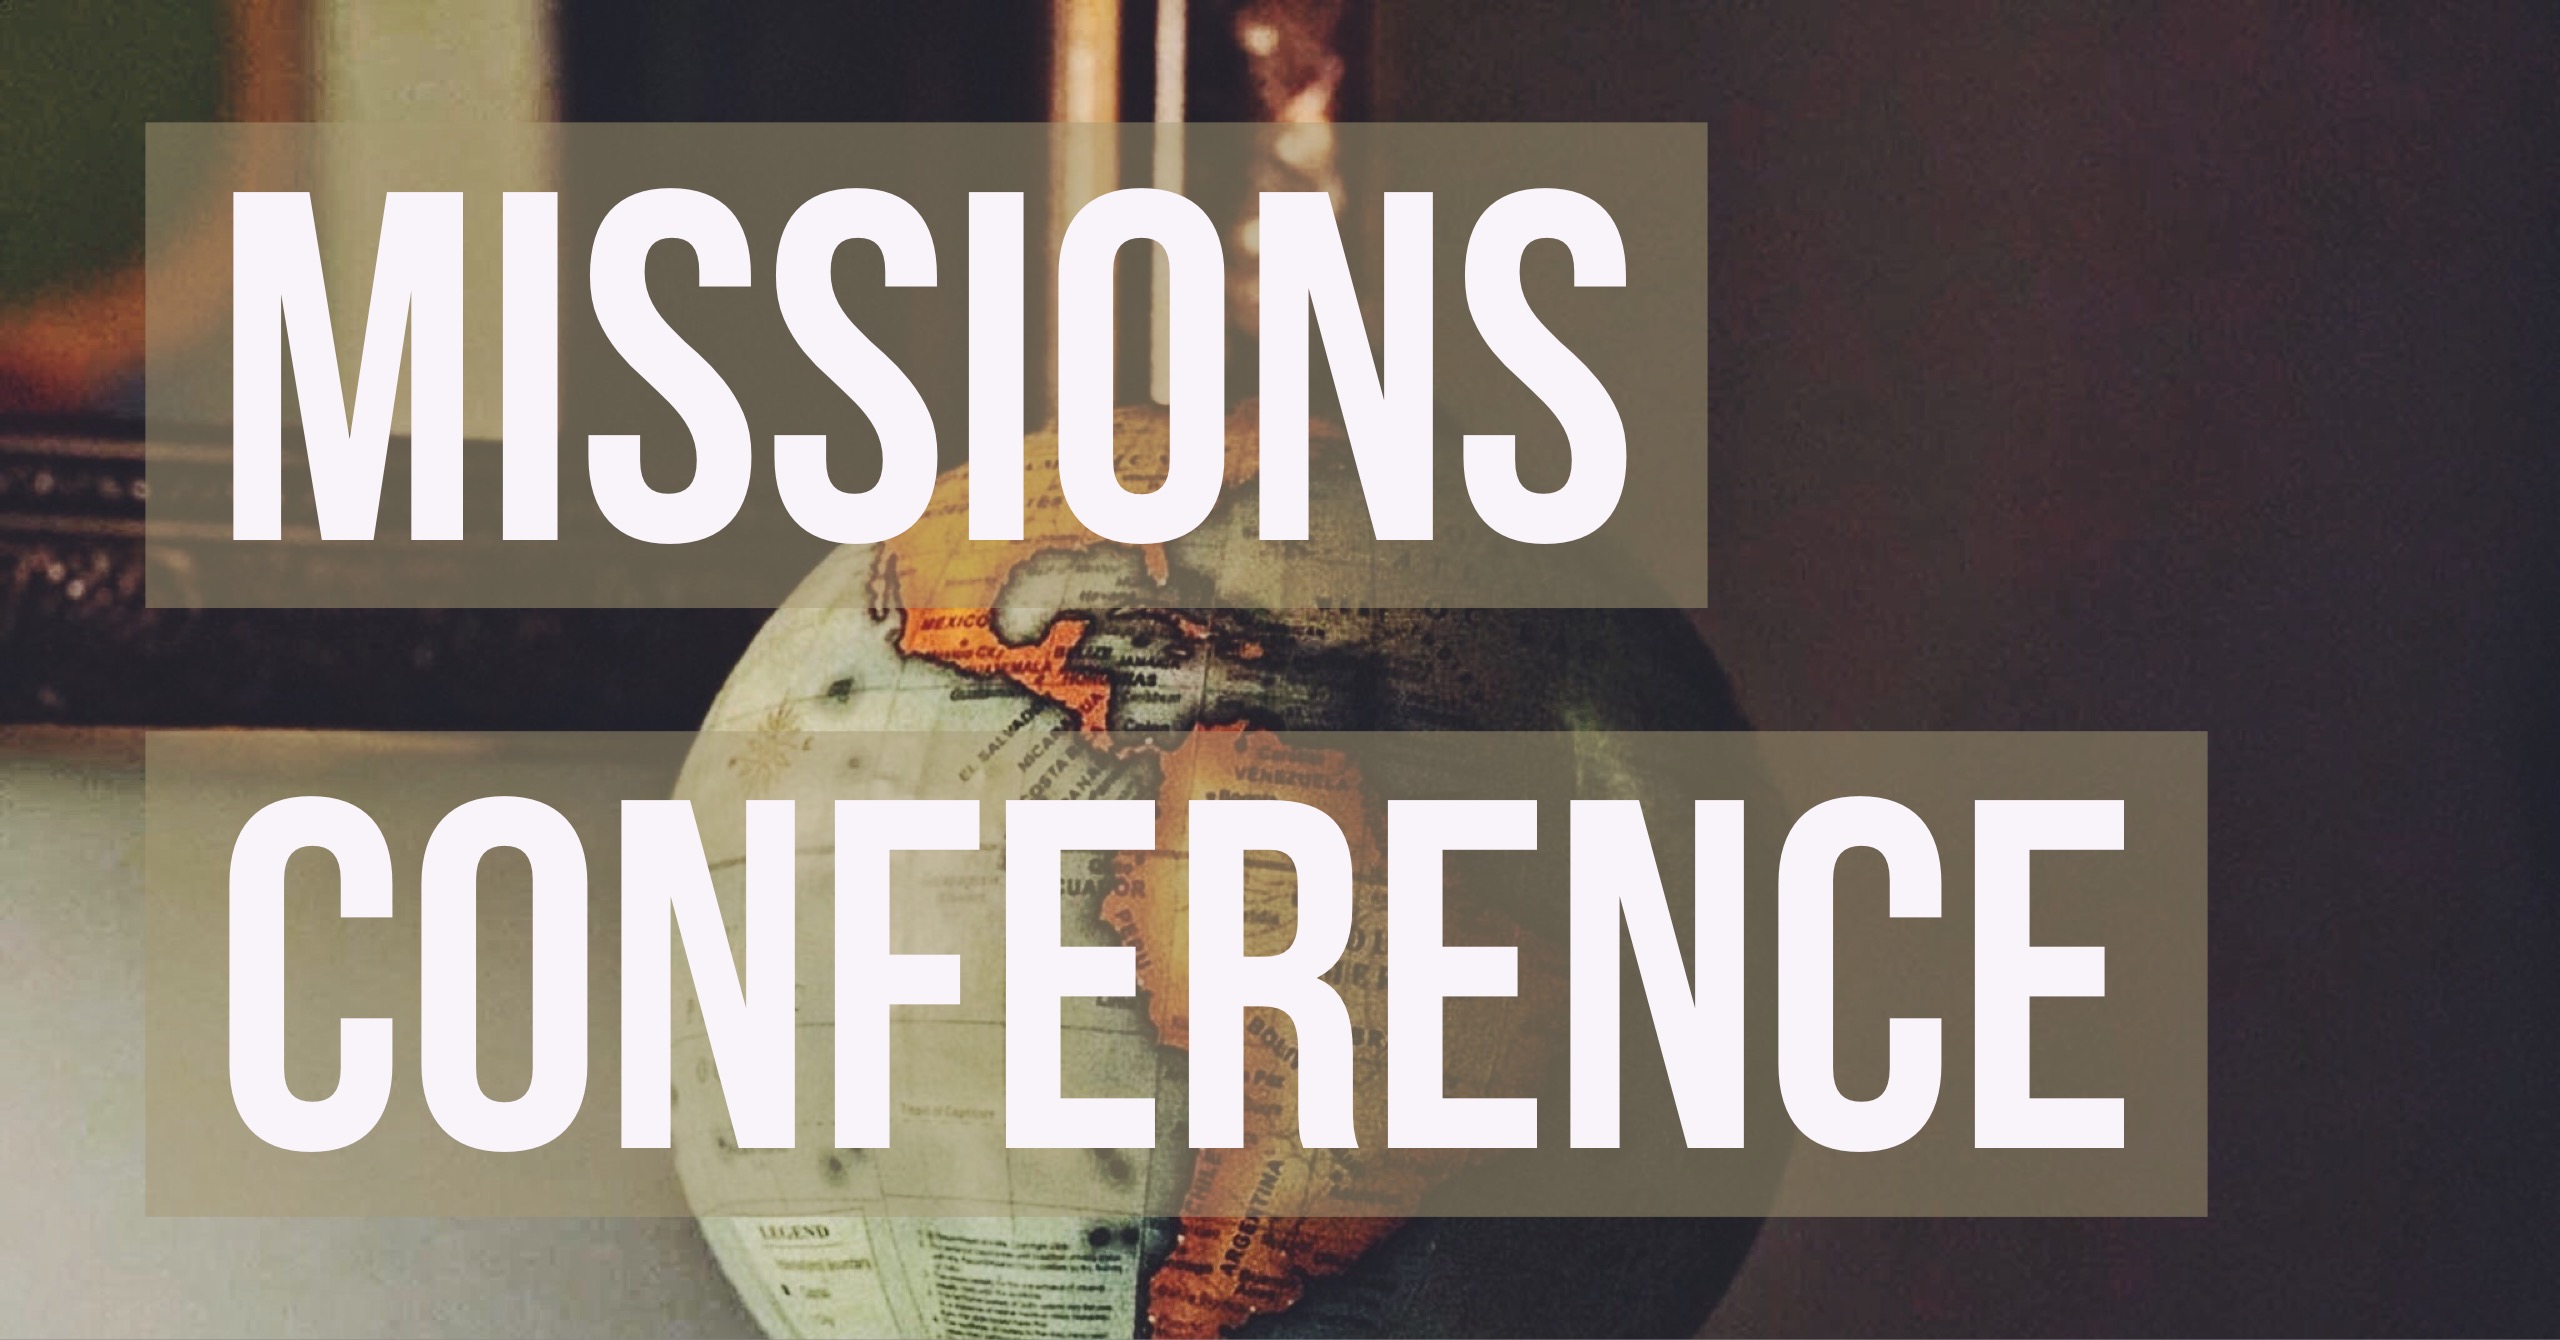 Missions Conference image